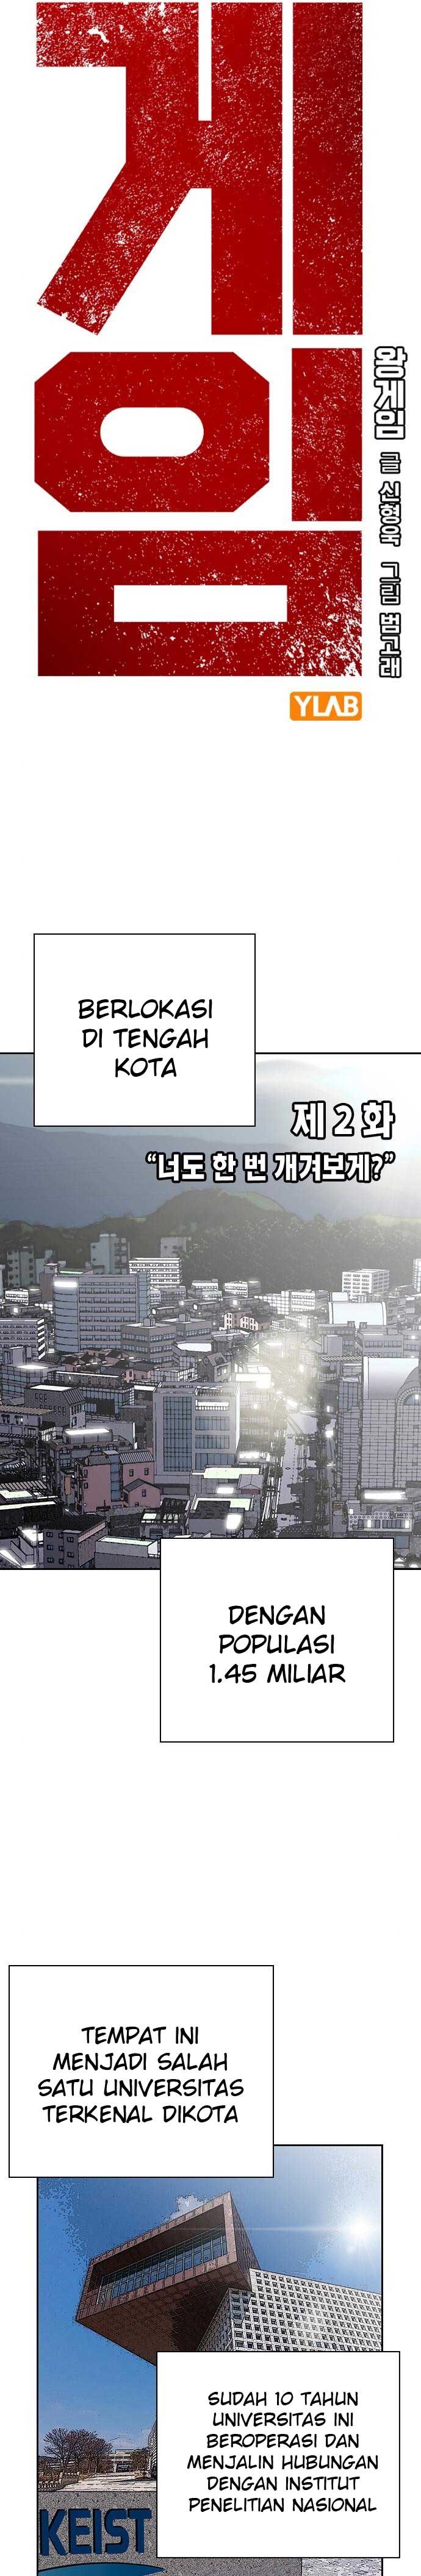 King Game (Shin Hyungwook) Chapter 02 - 315